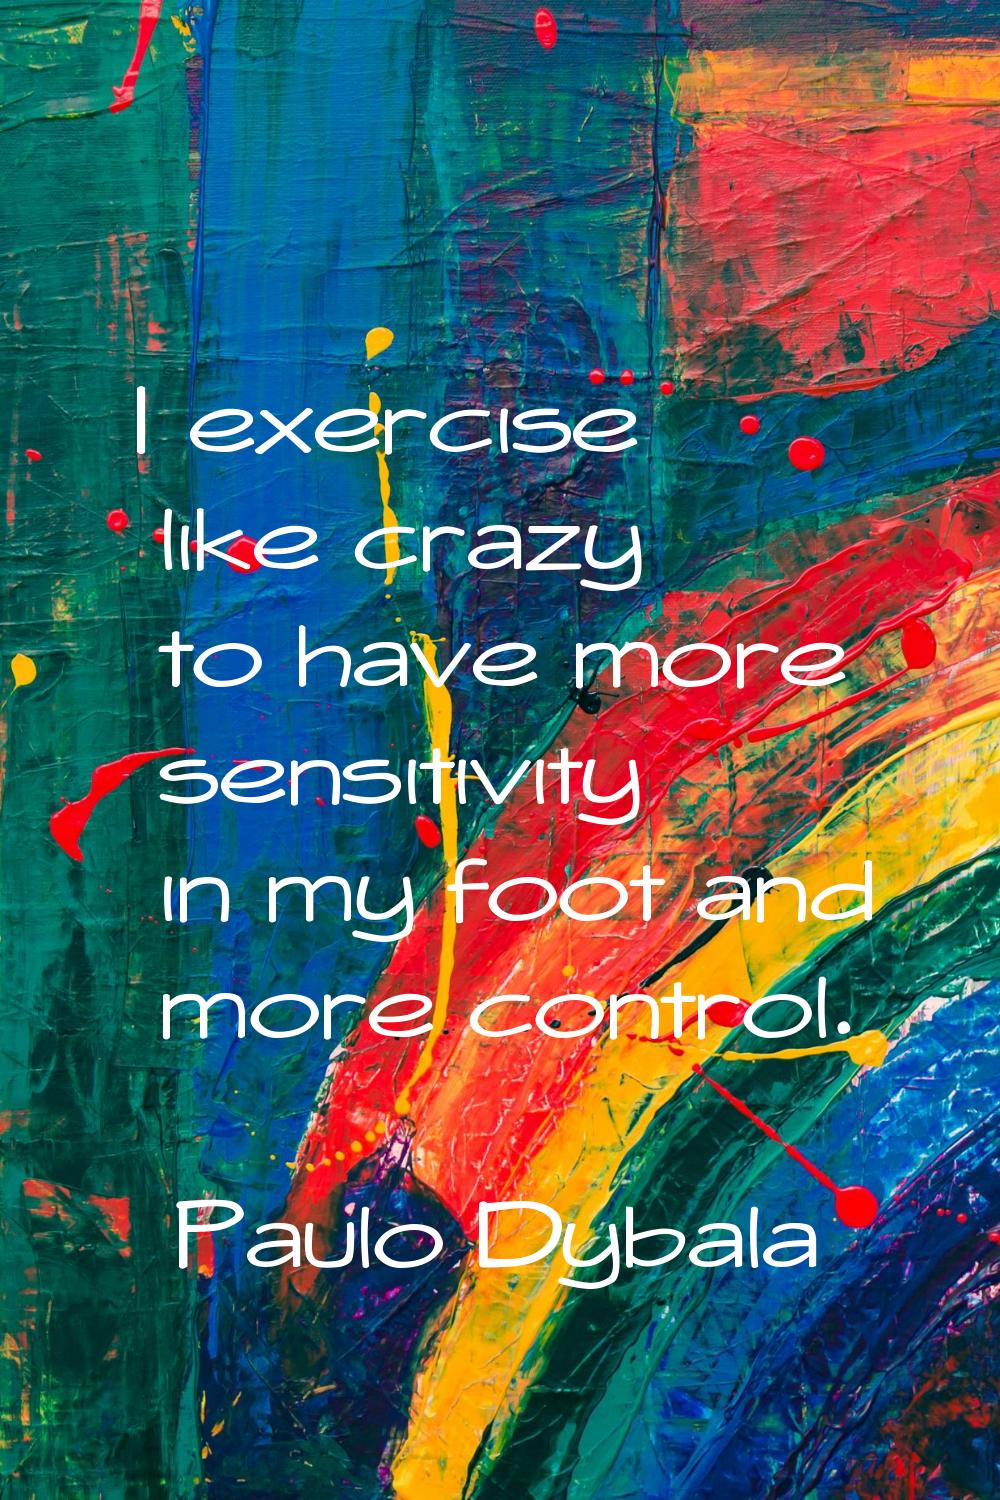 I exercise like crazy to have more sensitivity in my foot and more control.